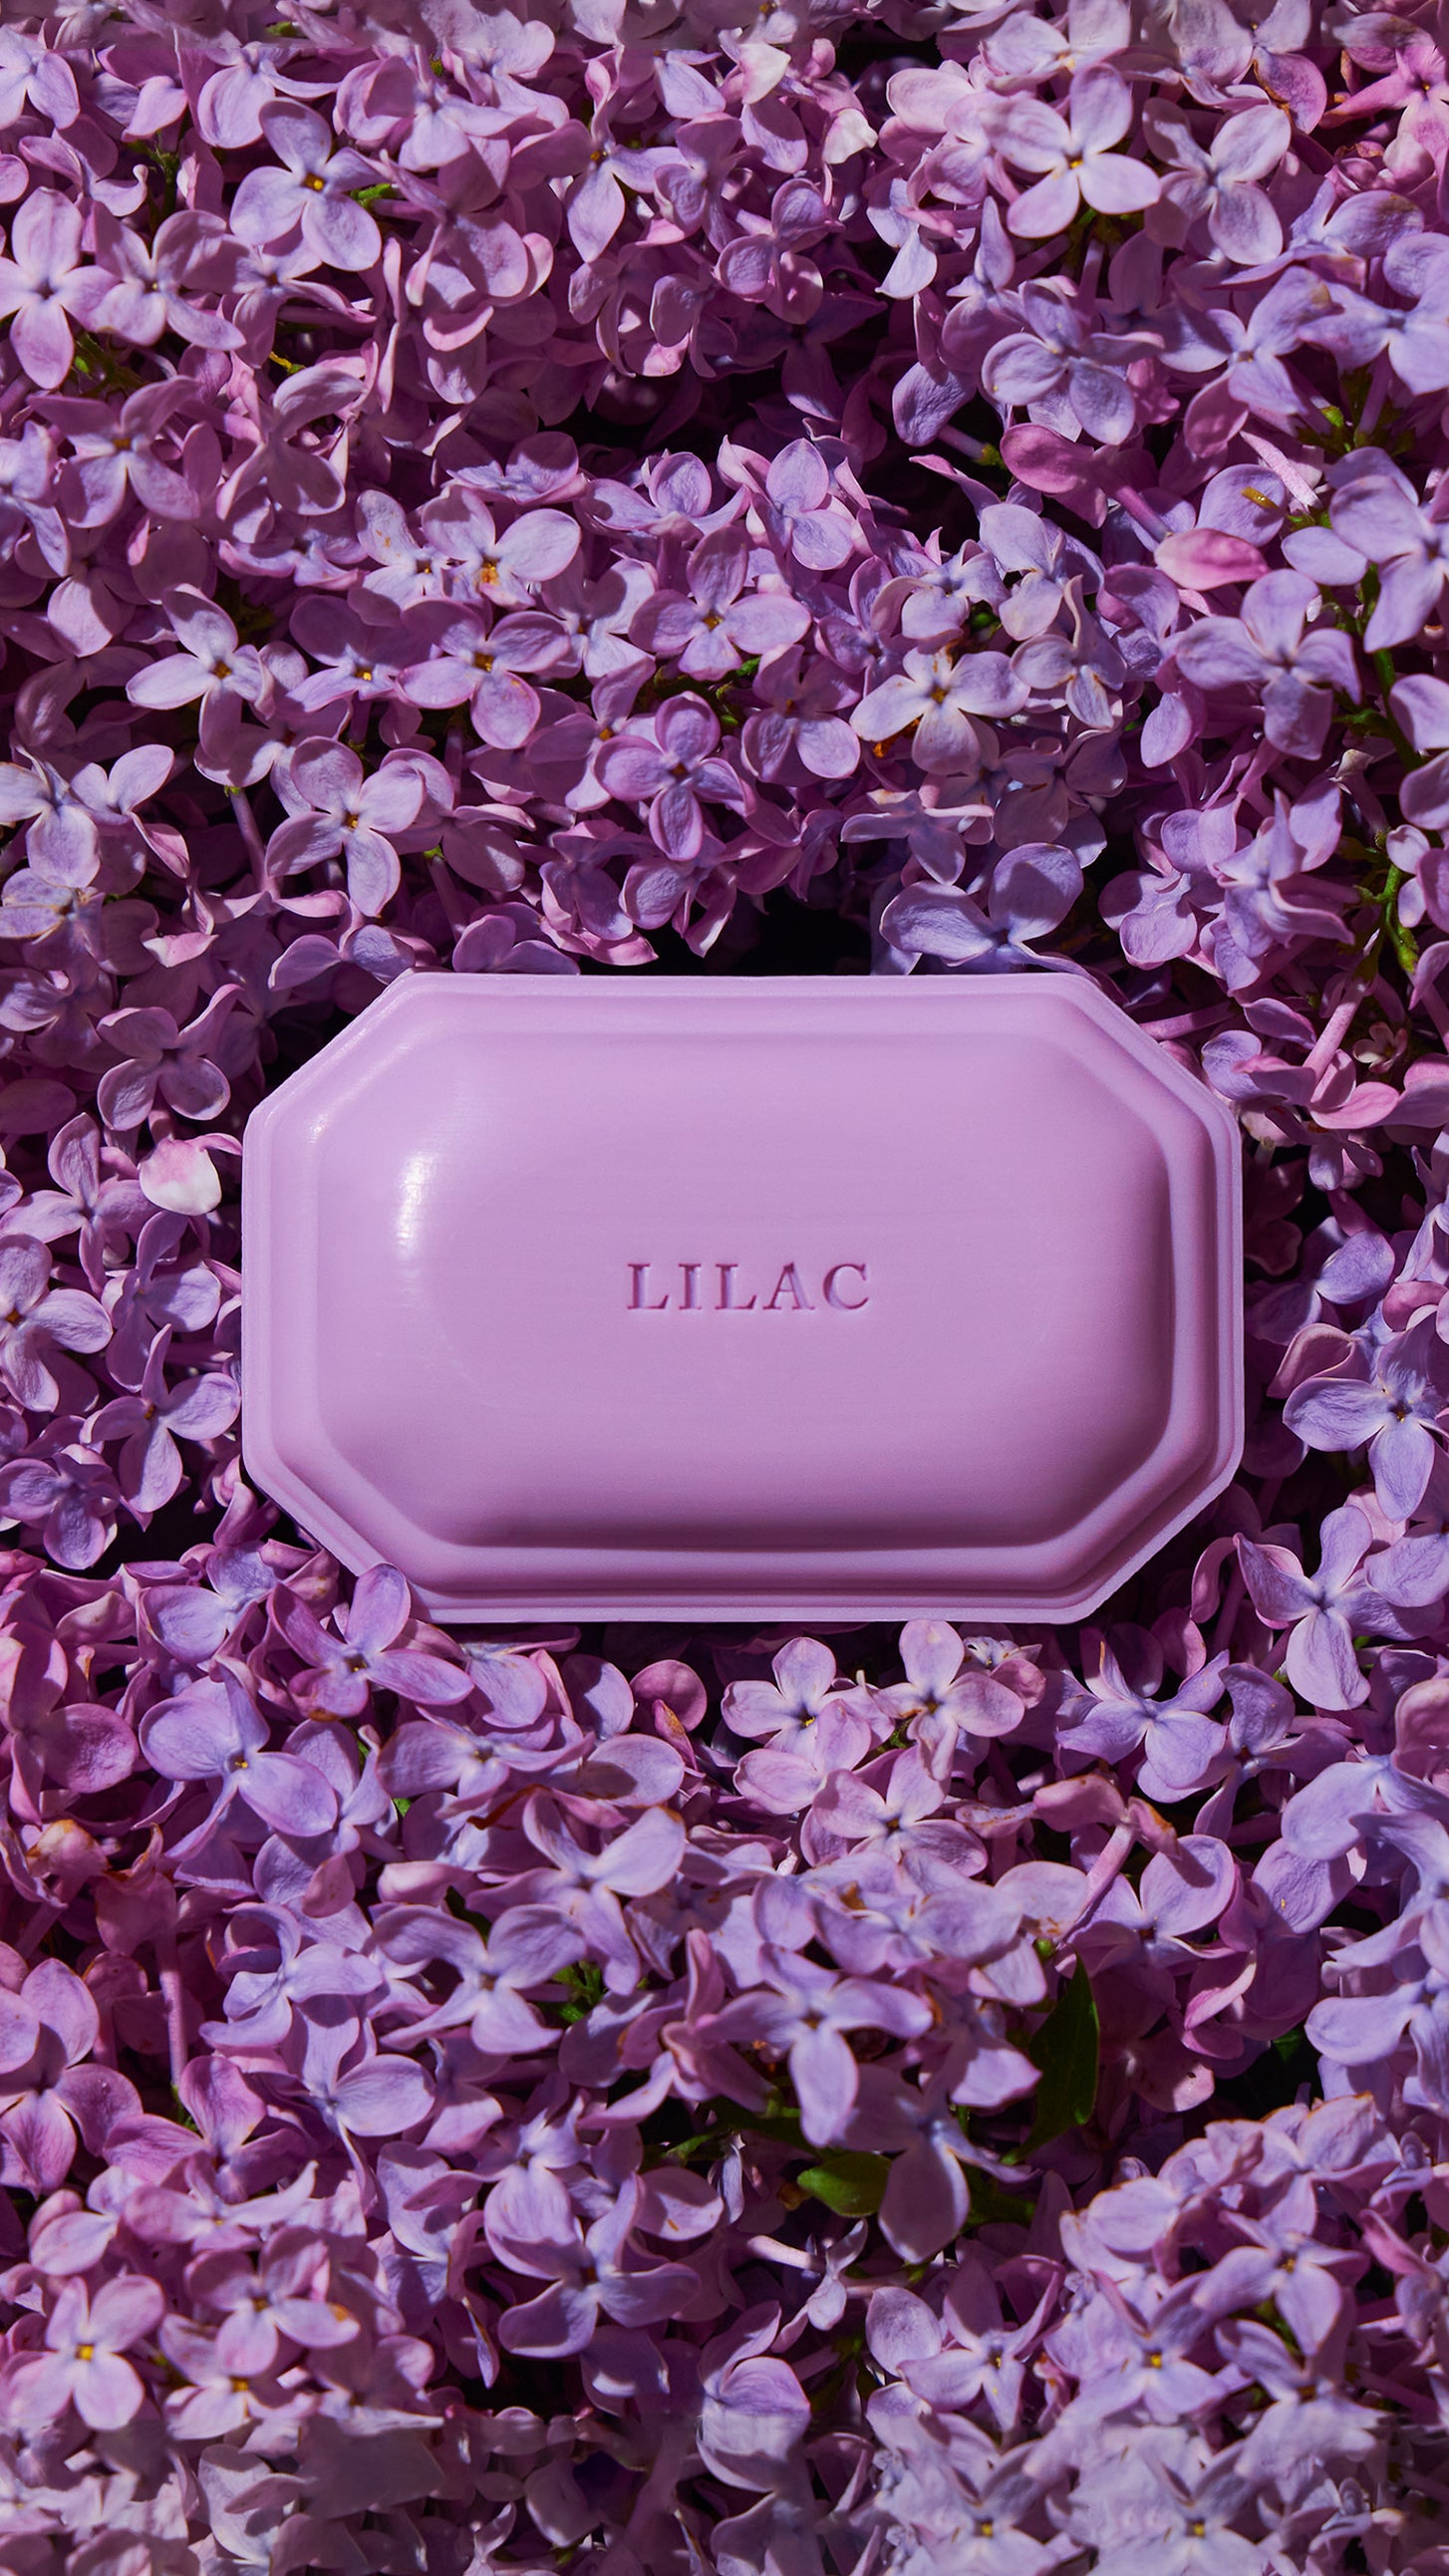 Lilac floral bath soap sitting atop a bed of lilac flowers, made by Caswell-Massey in collaboration with NYBG